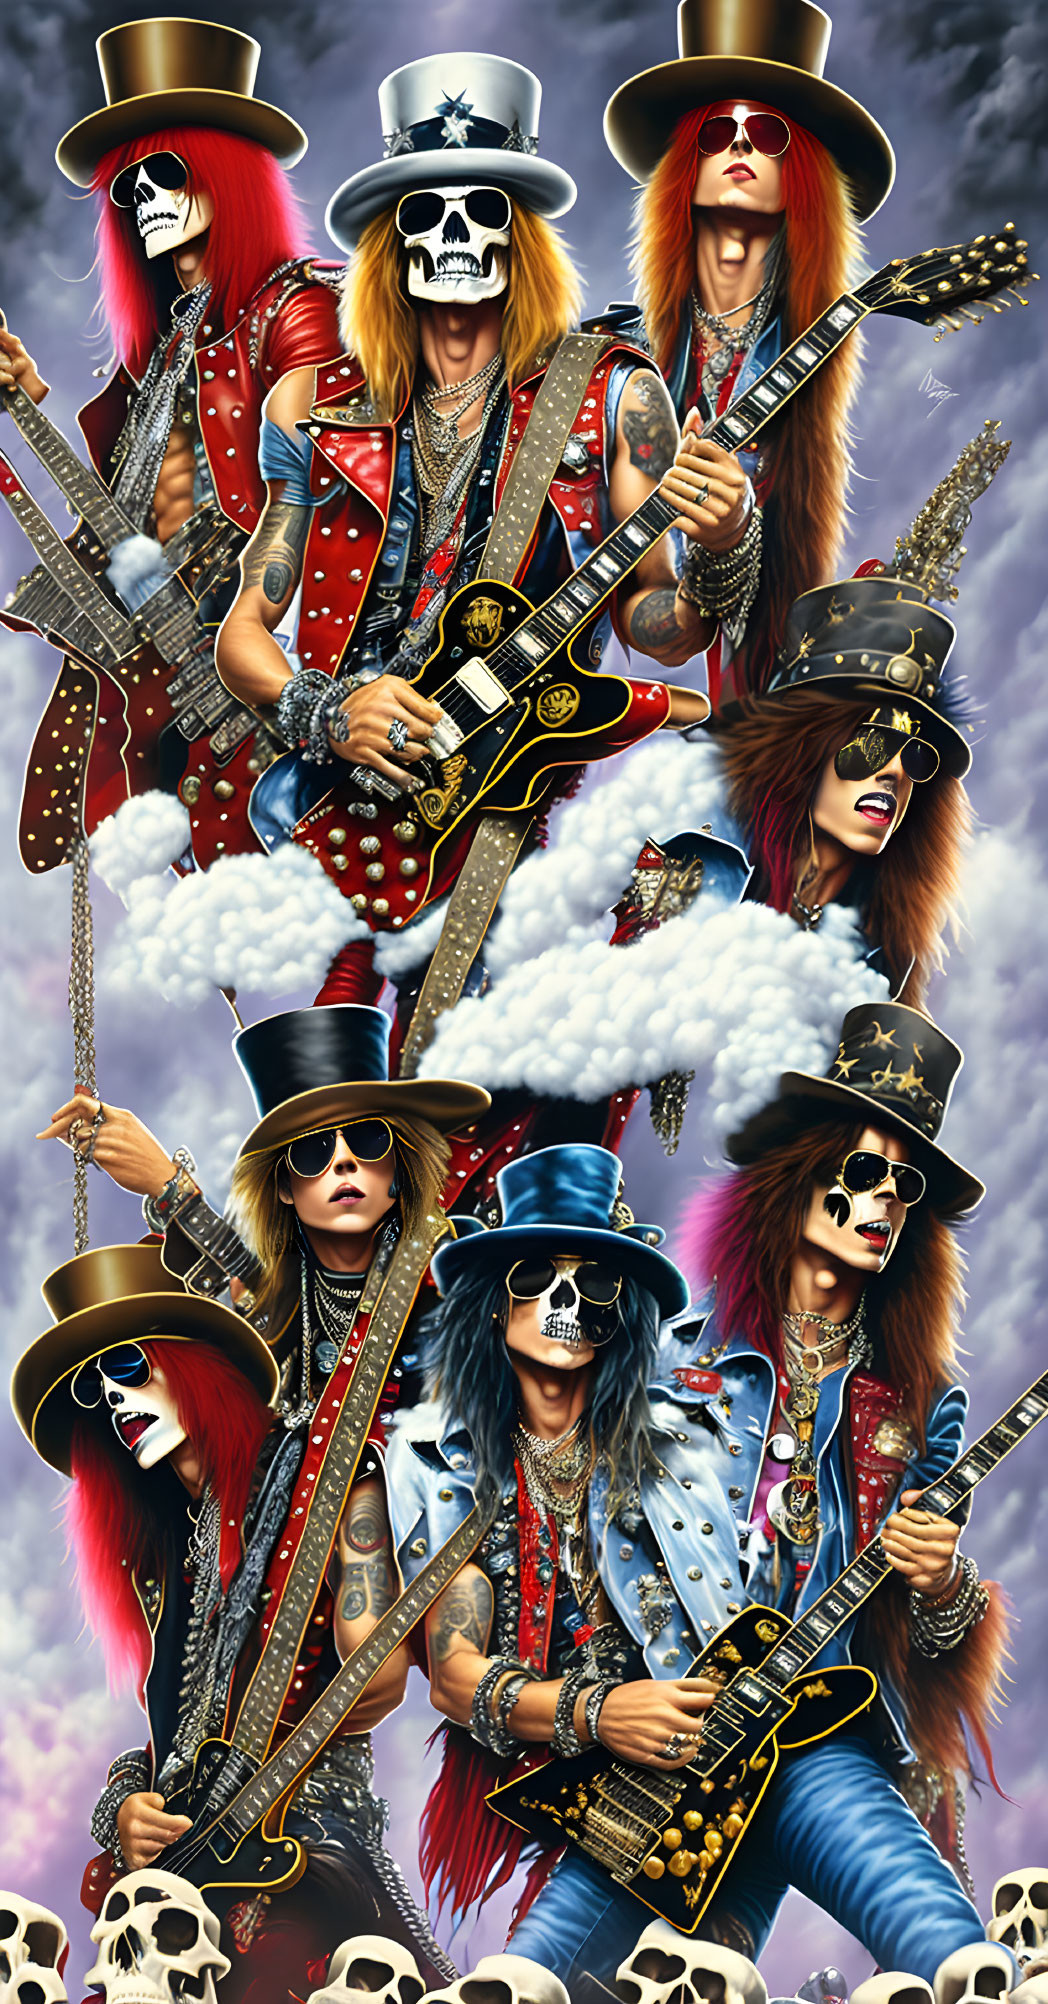 Stylized rock band illustration with five members in flamboyant costumes and makeup against skull-adorn